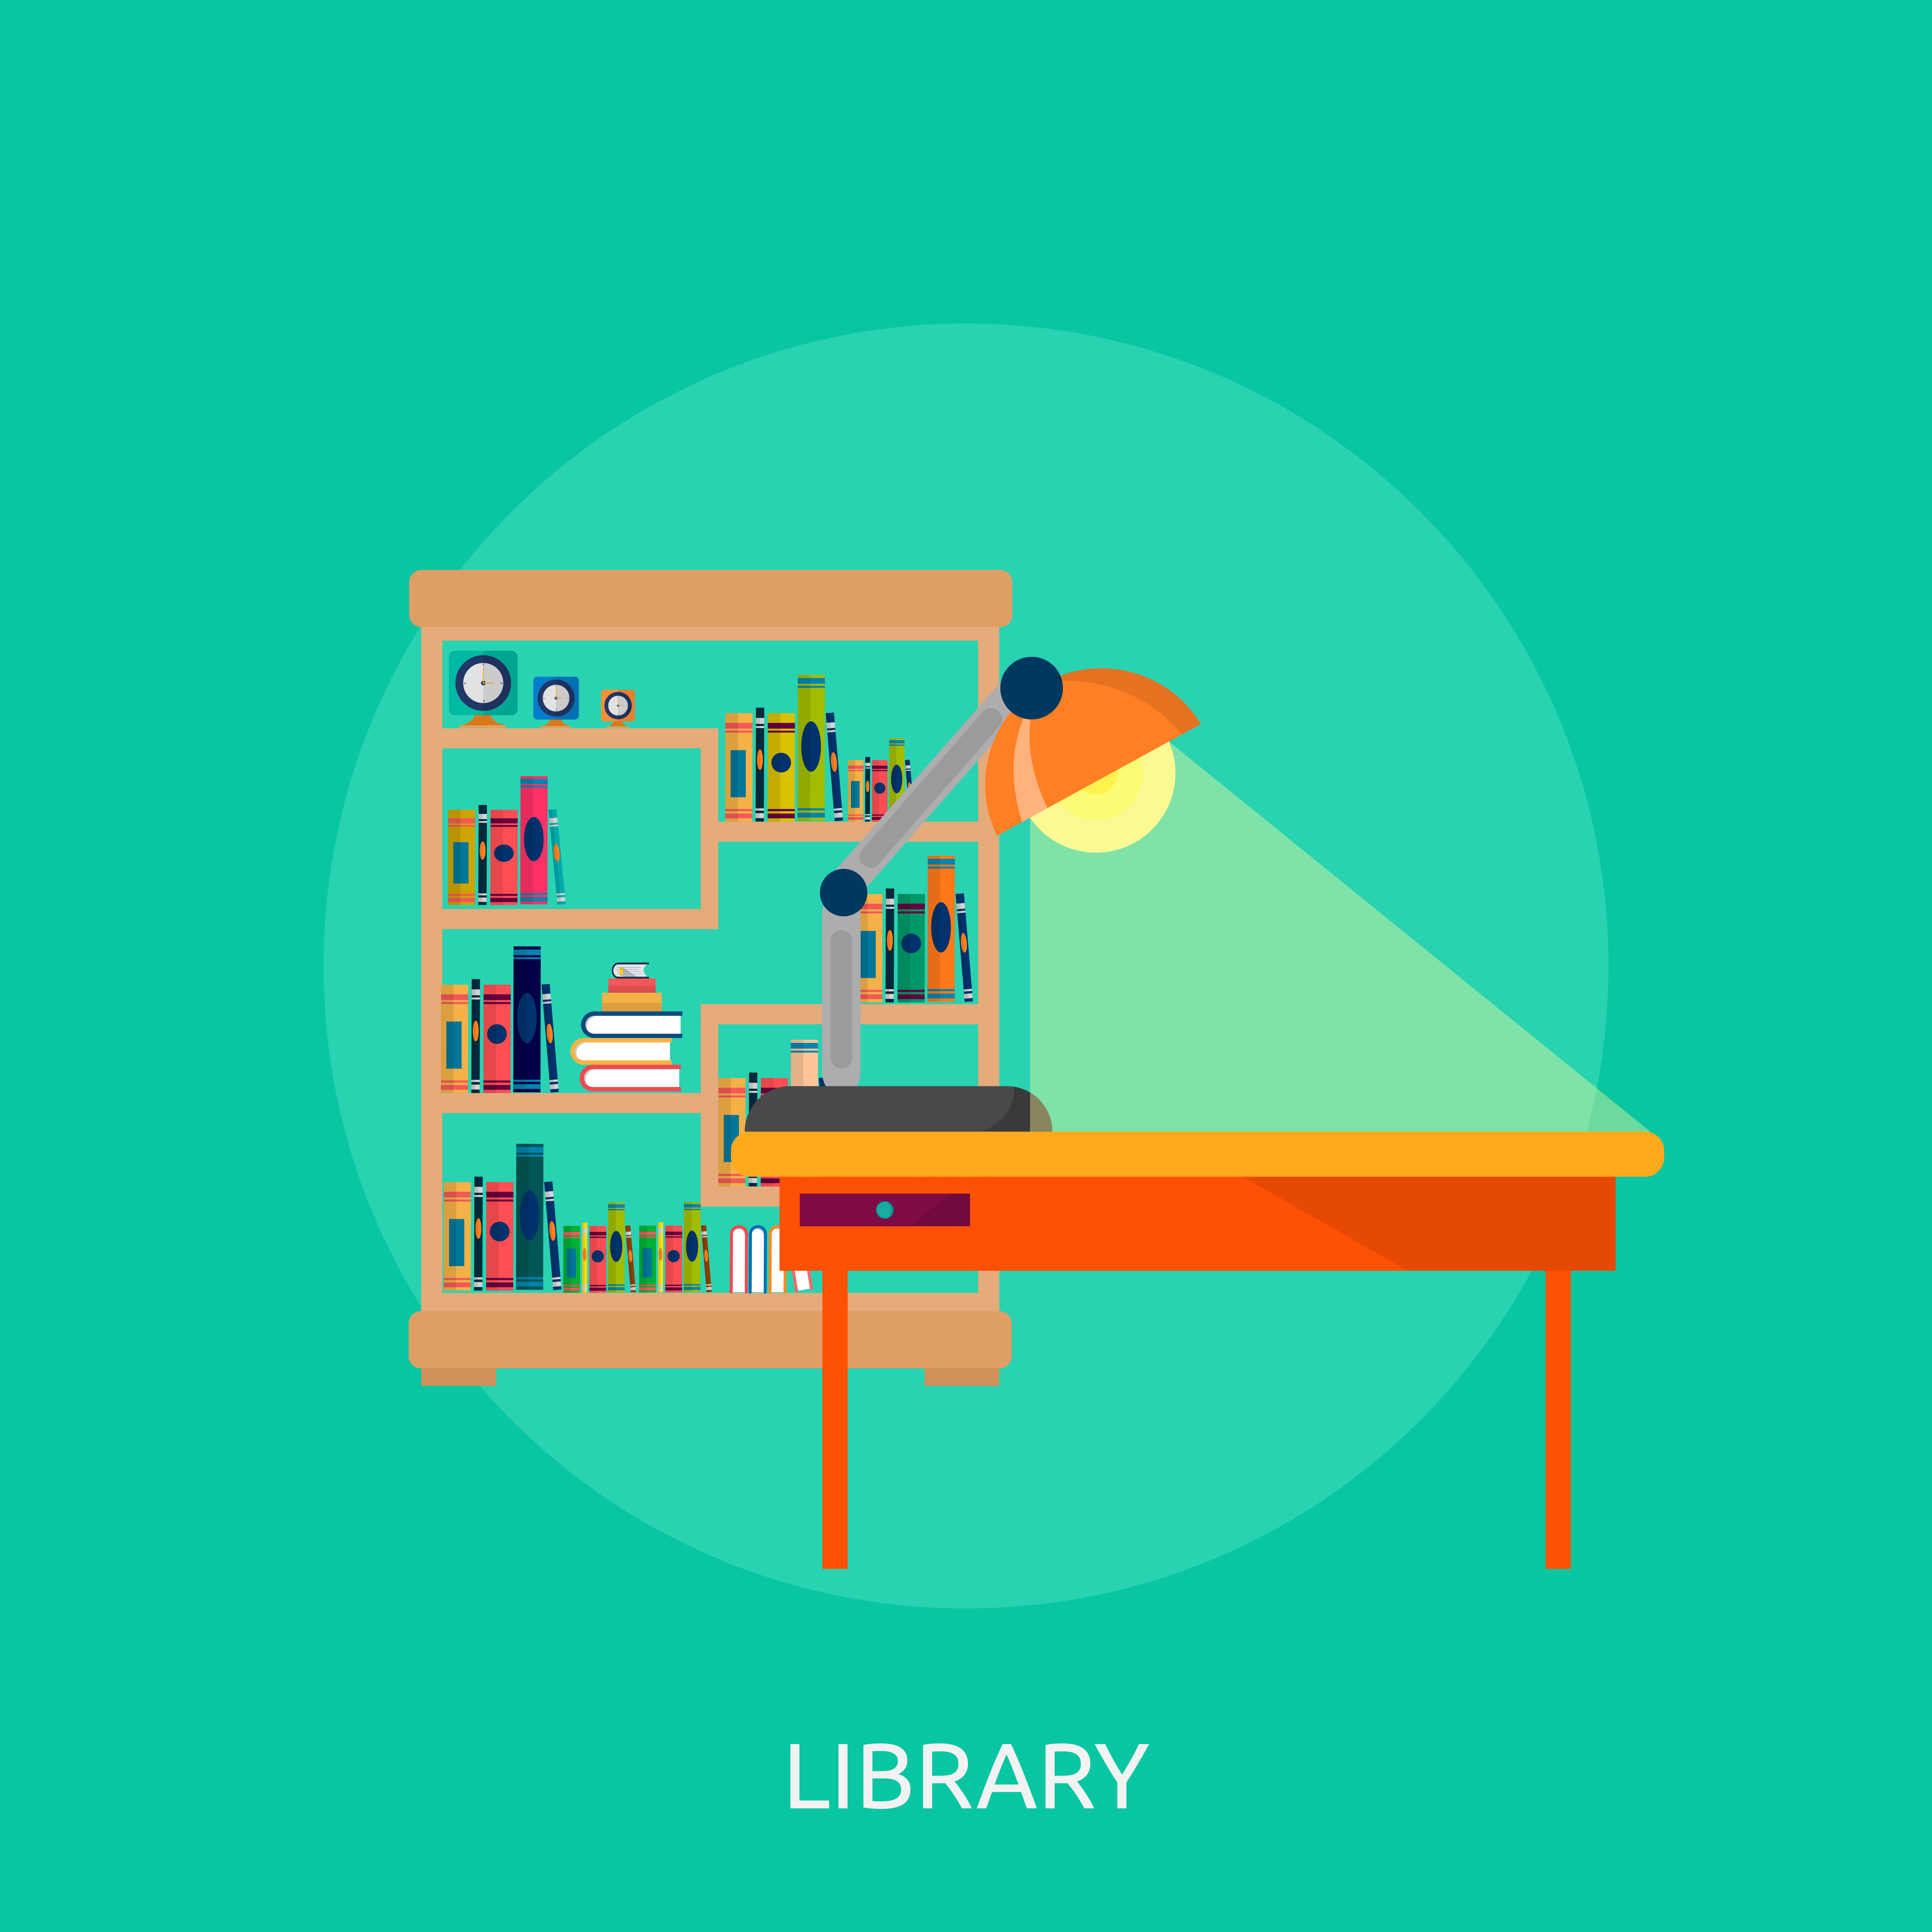 Download Library Conceptual illustration Design - Download Free ...